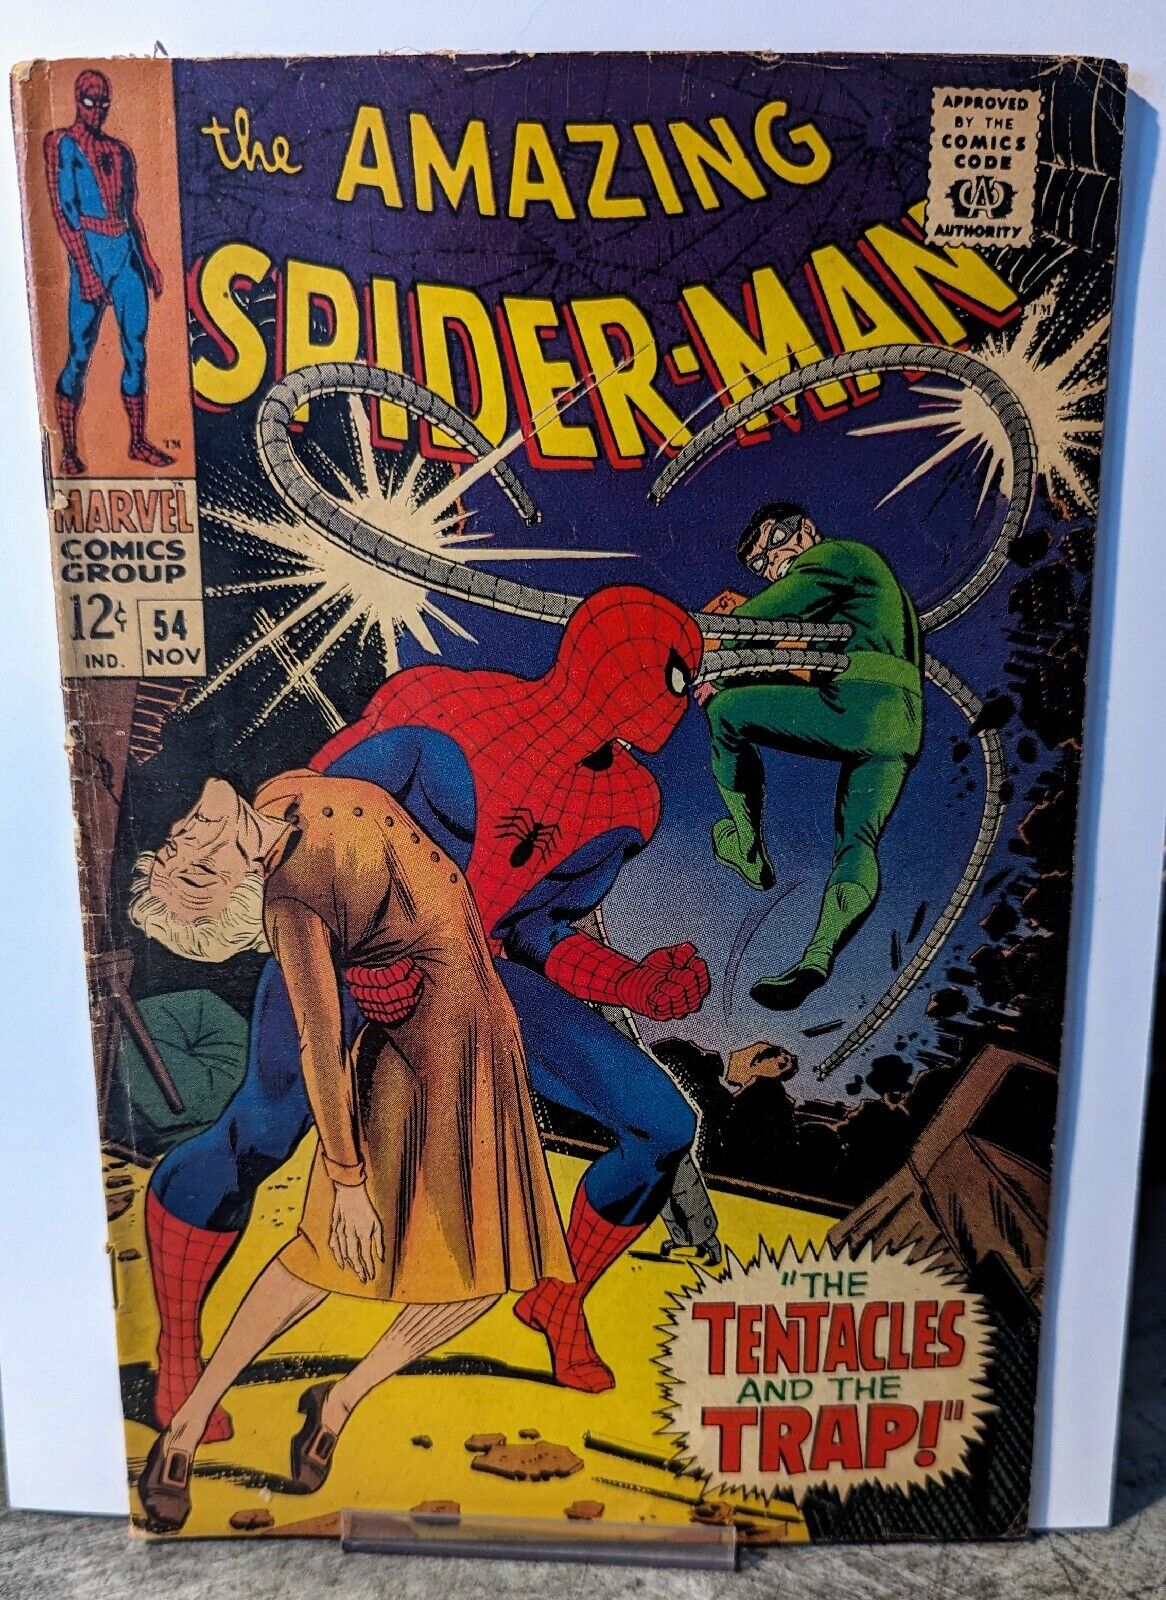 The Amazing Spider-Man, Vol. 1 #54A